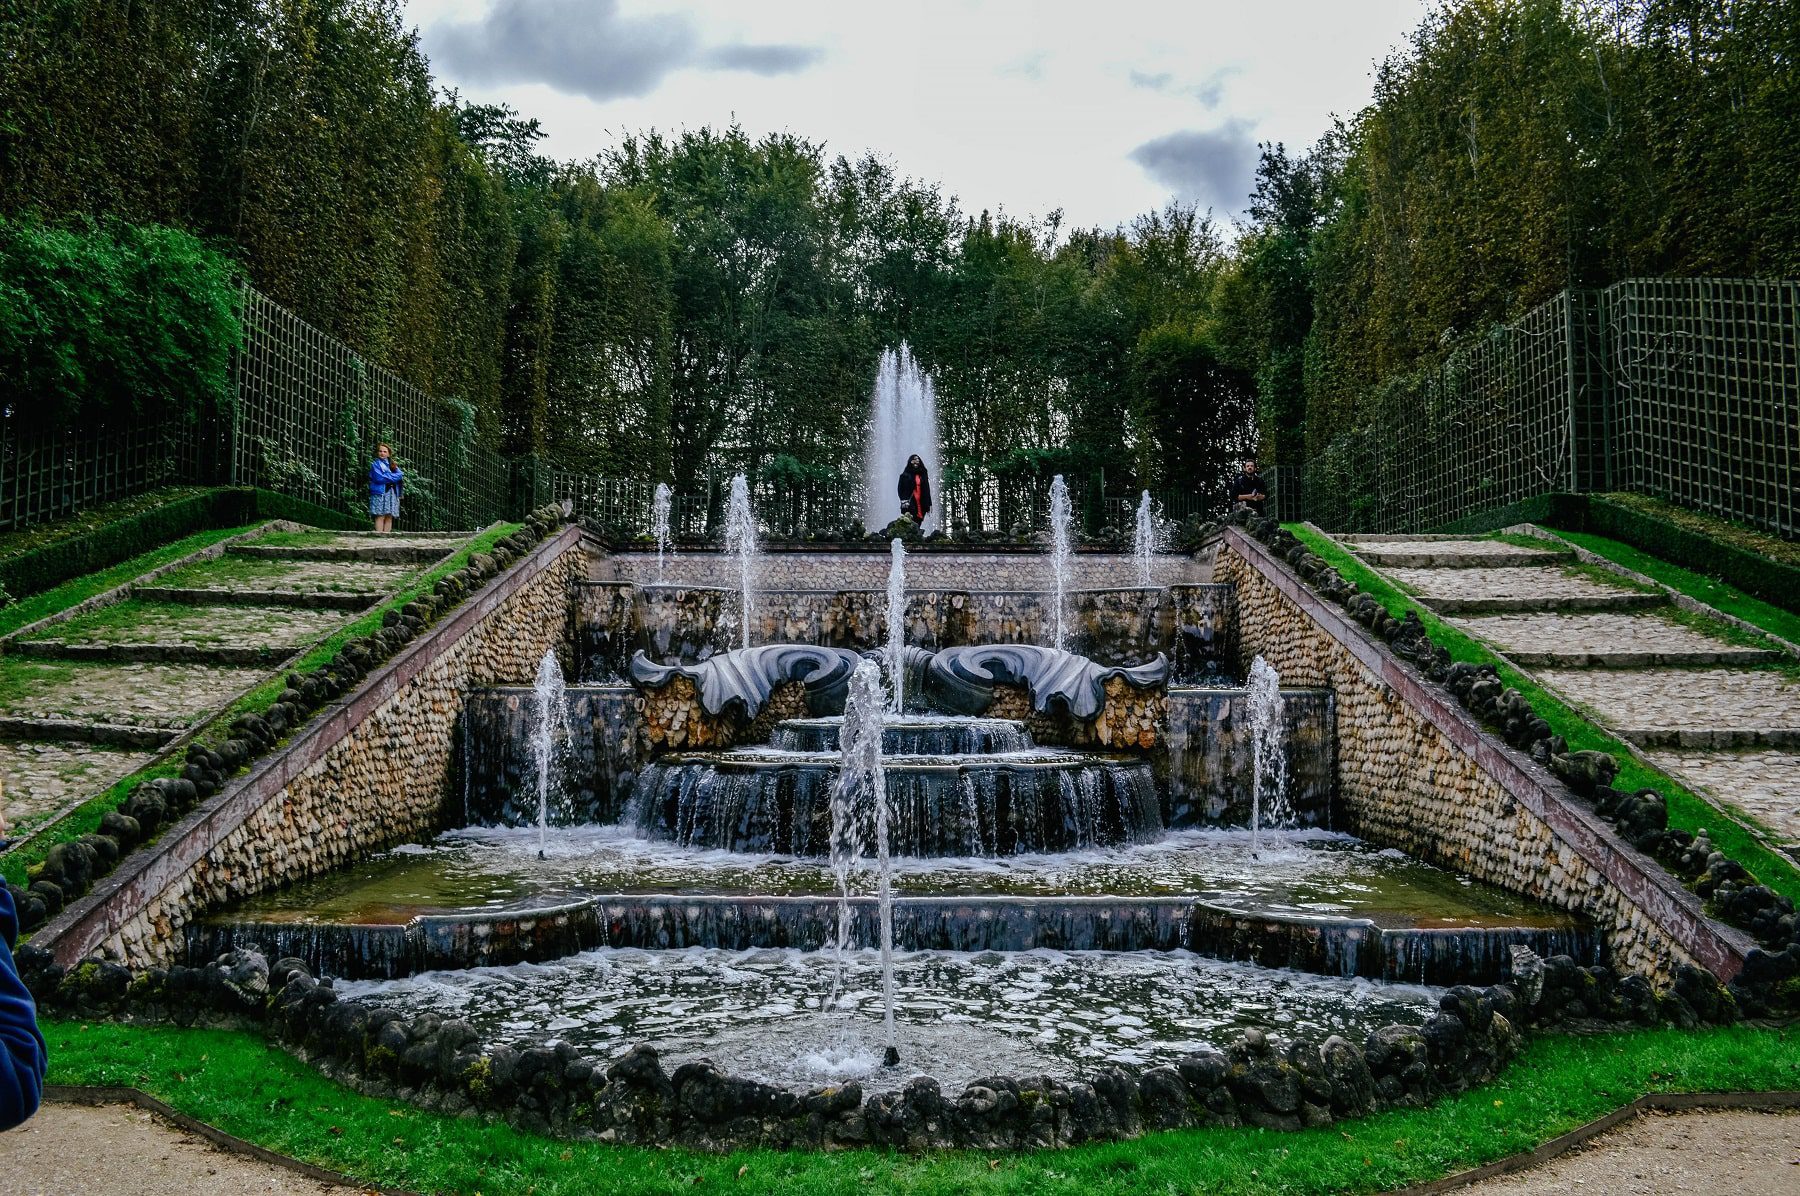 A beautiful fountain in the garden of Versailles